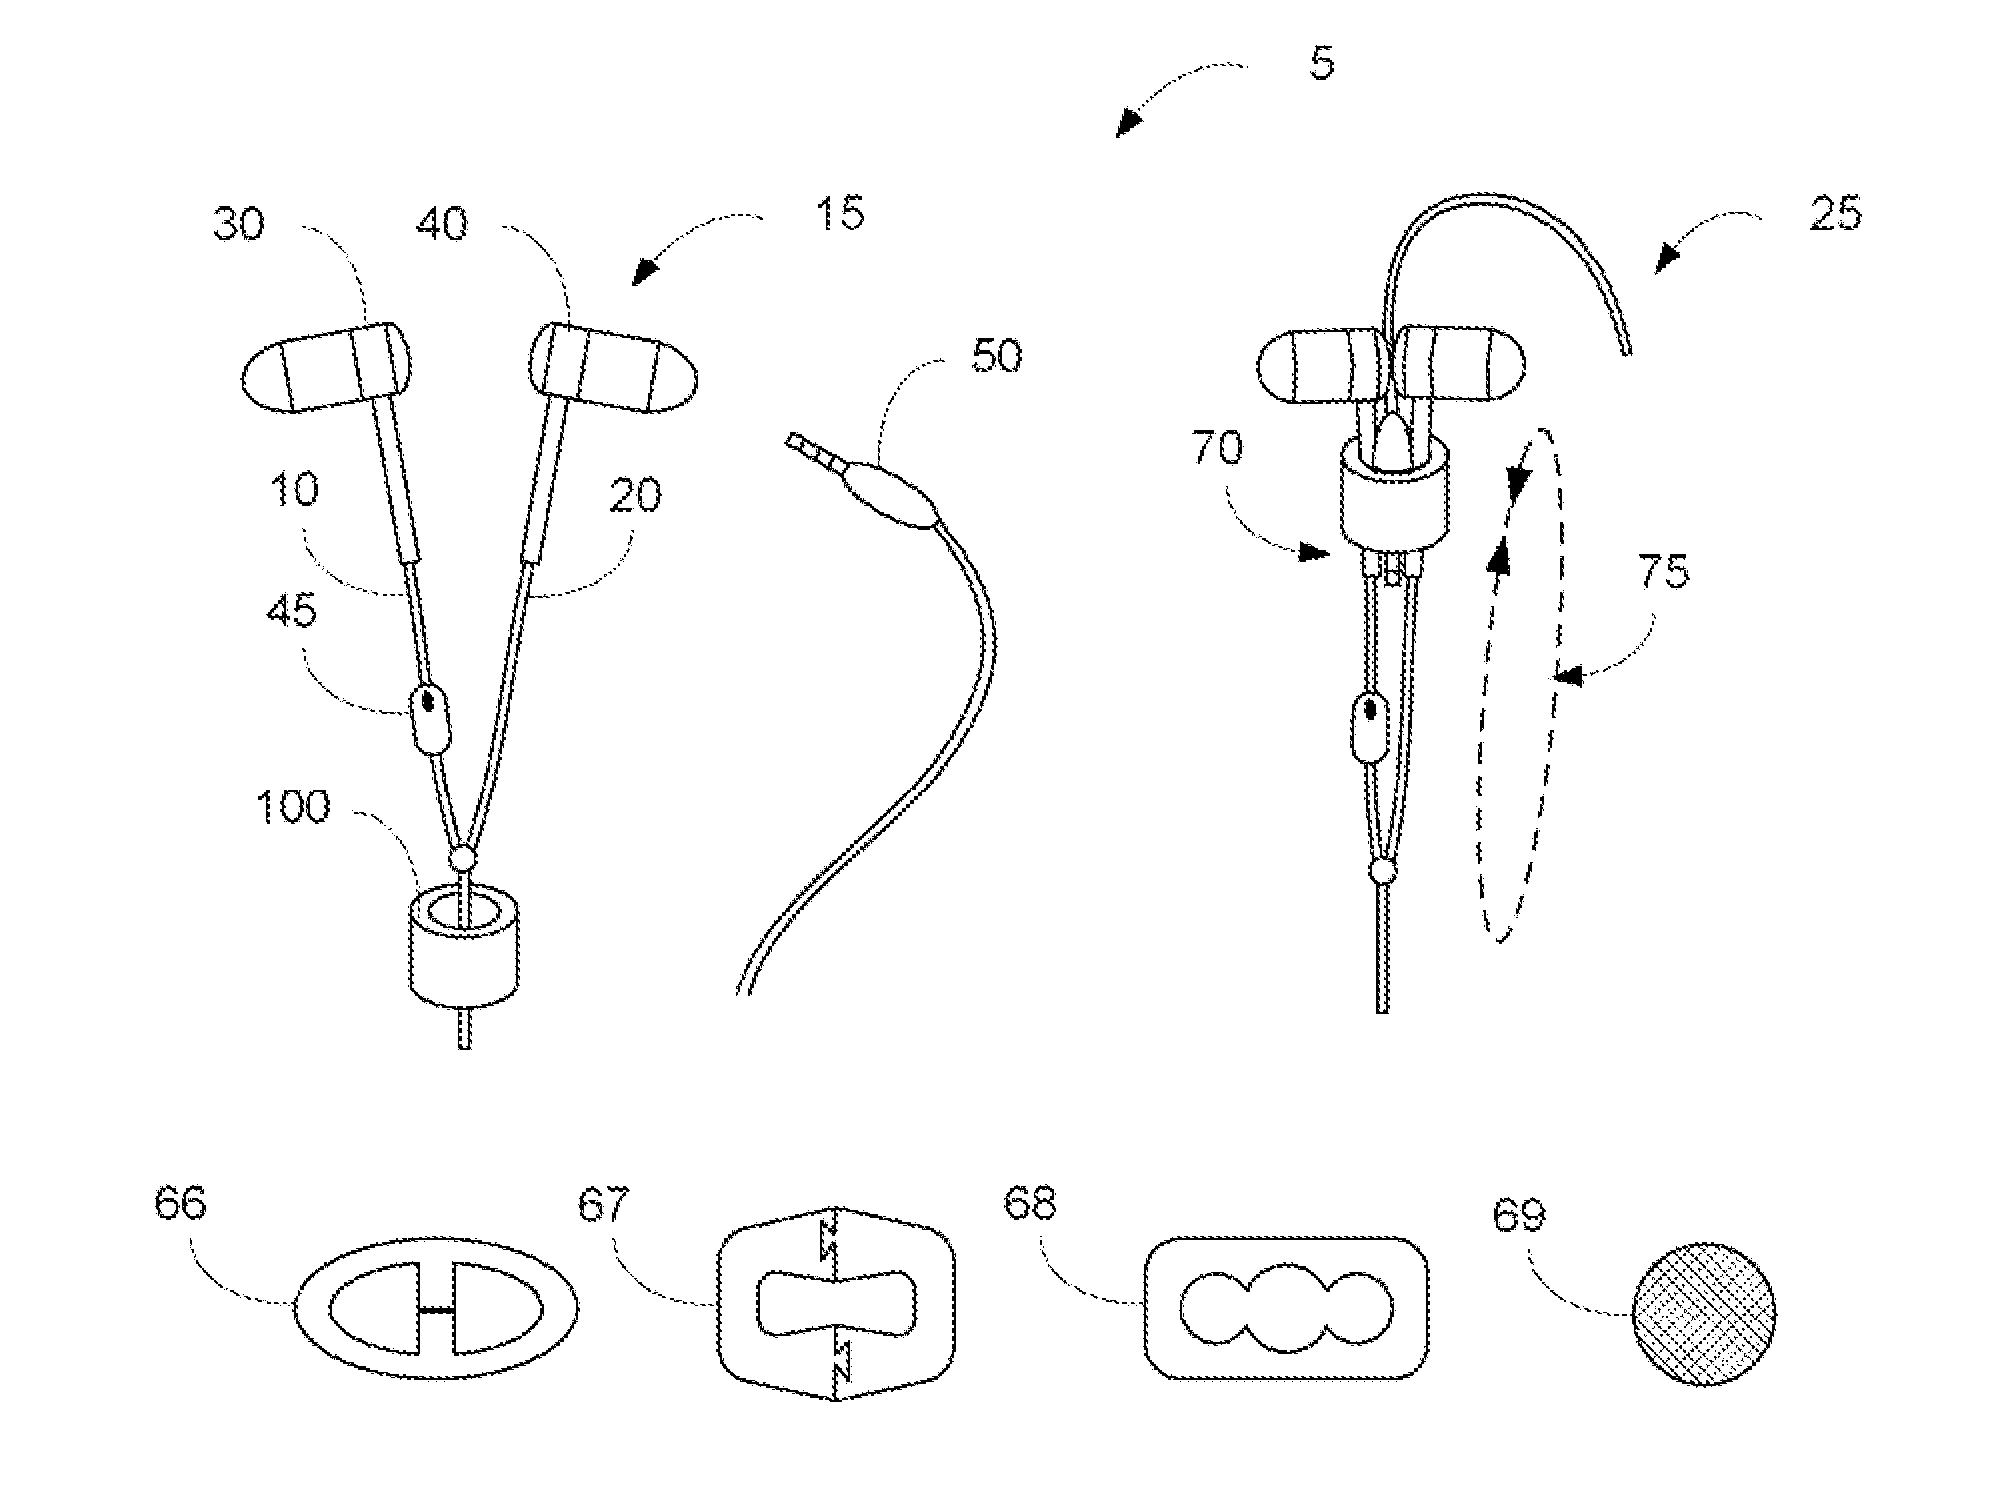 Headphone with restraint and methods